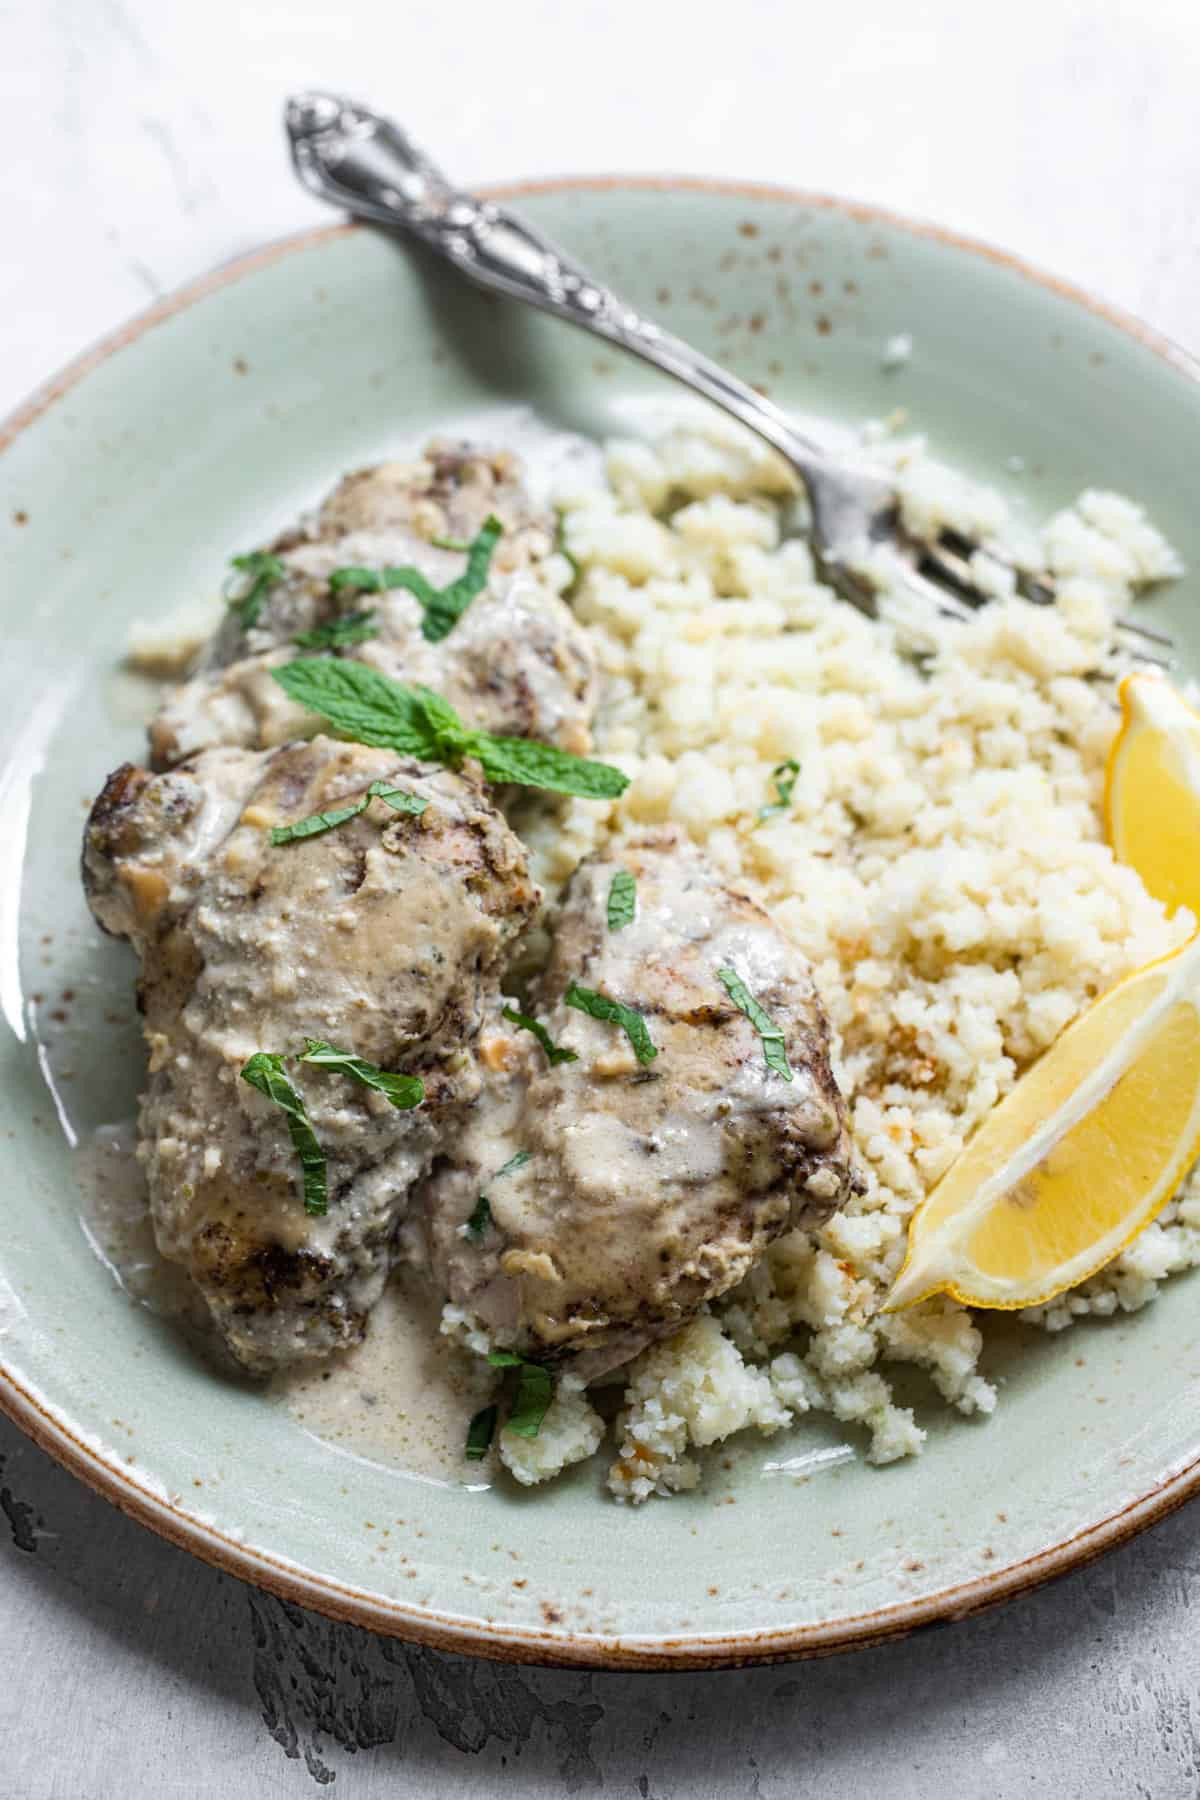 Keto Chicken Thighs Slow Cooker
 Easy Middle Eastern Keto Slow Cooker Chicken Thighs